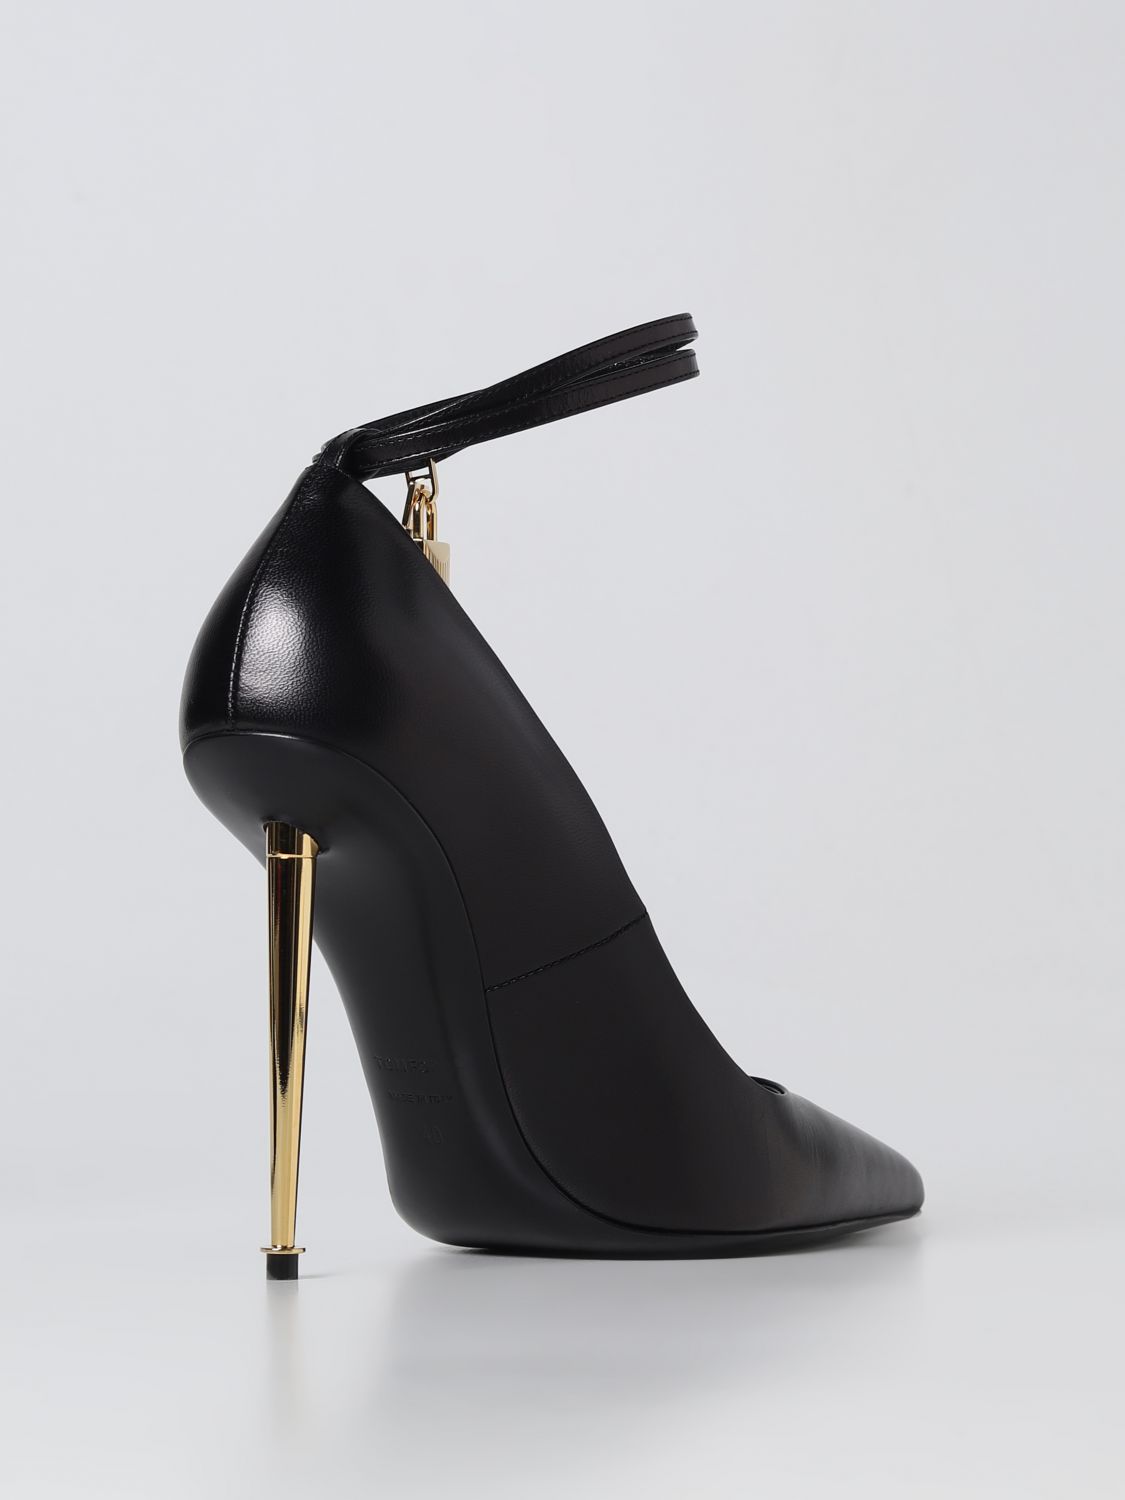 fox shore captain TOM FORD: high heel shoes for woman - Black | Tom Ford high heel shoes  W2271LKD002G online on GIGLIO.COM